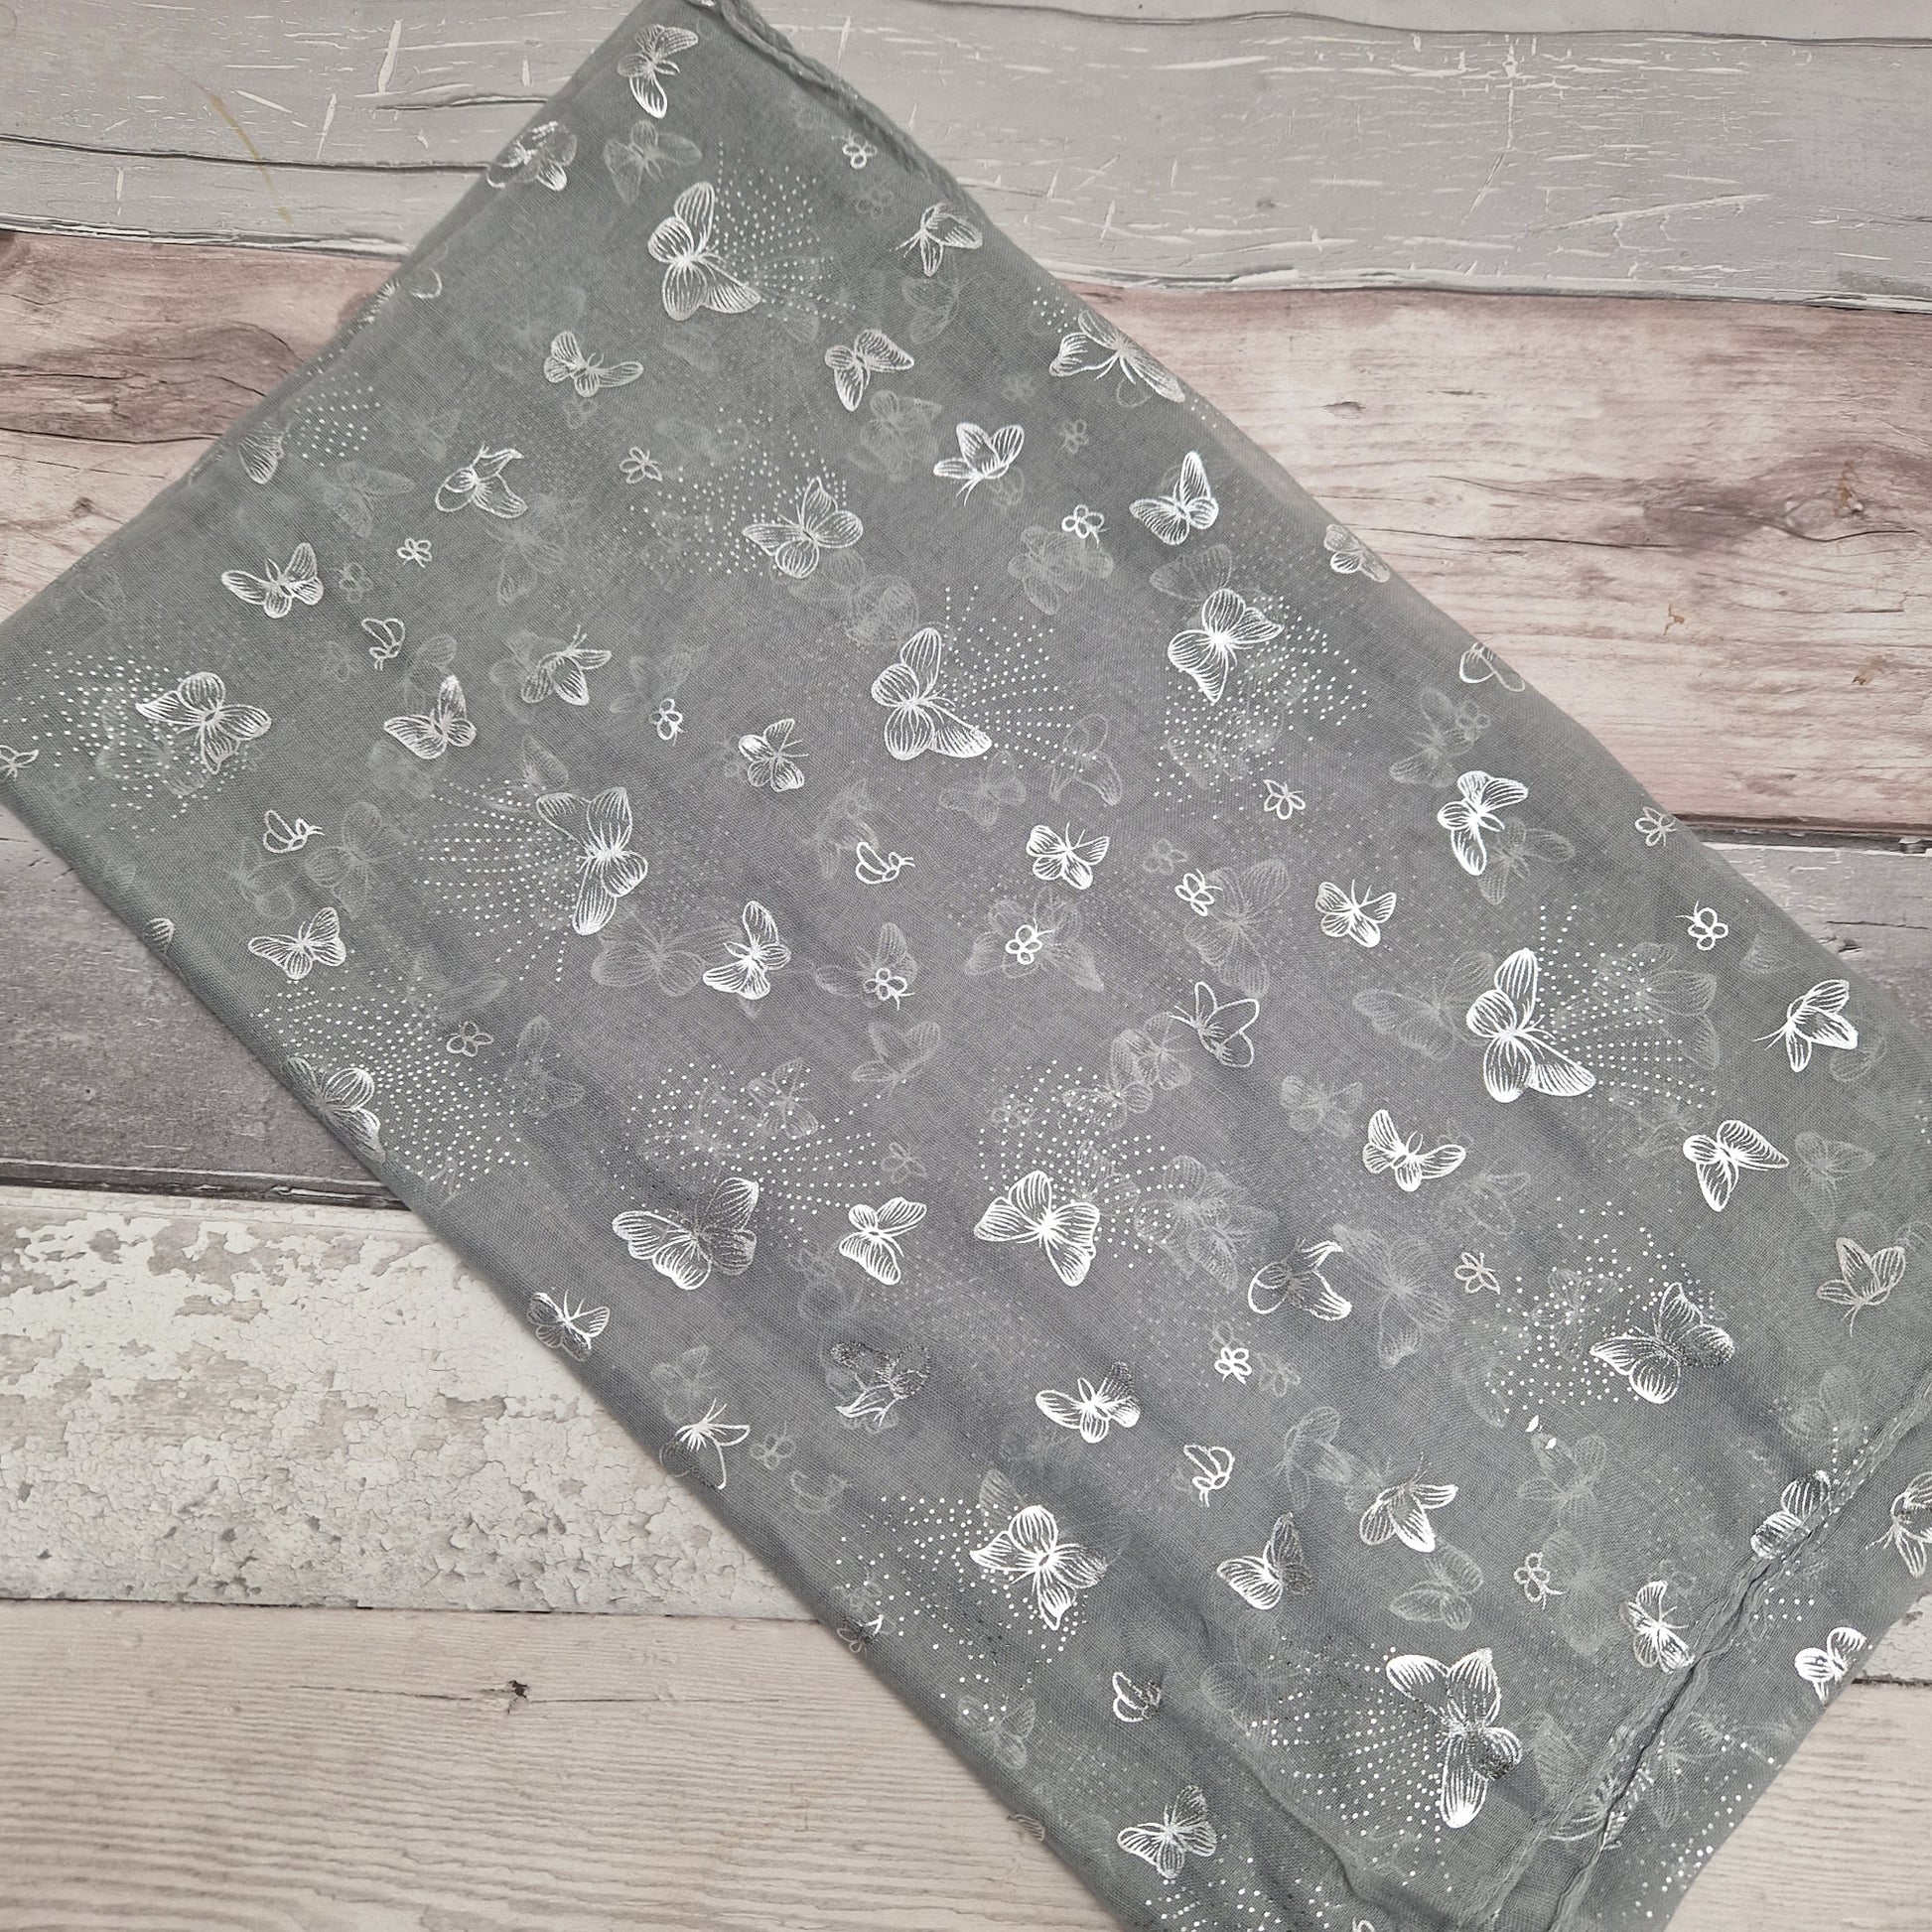 Dove Grey Scarf covered in metallic silver grey butterflies.